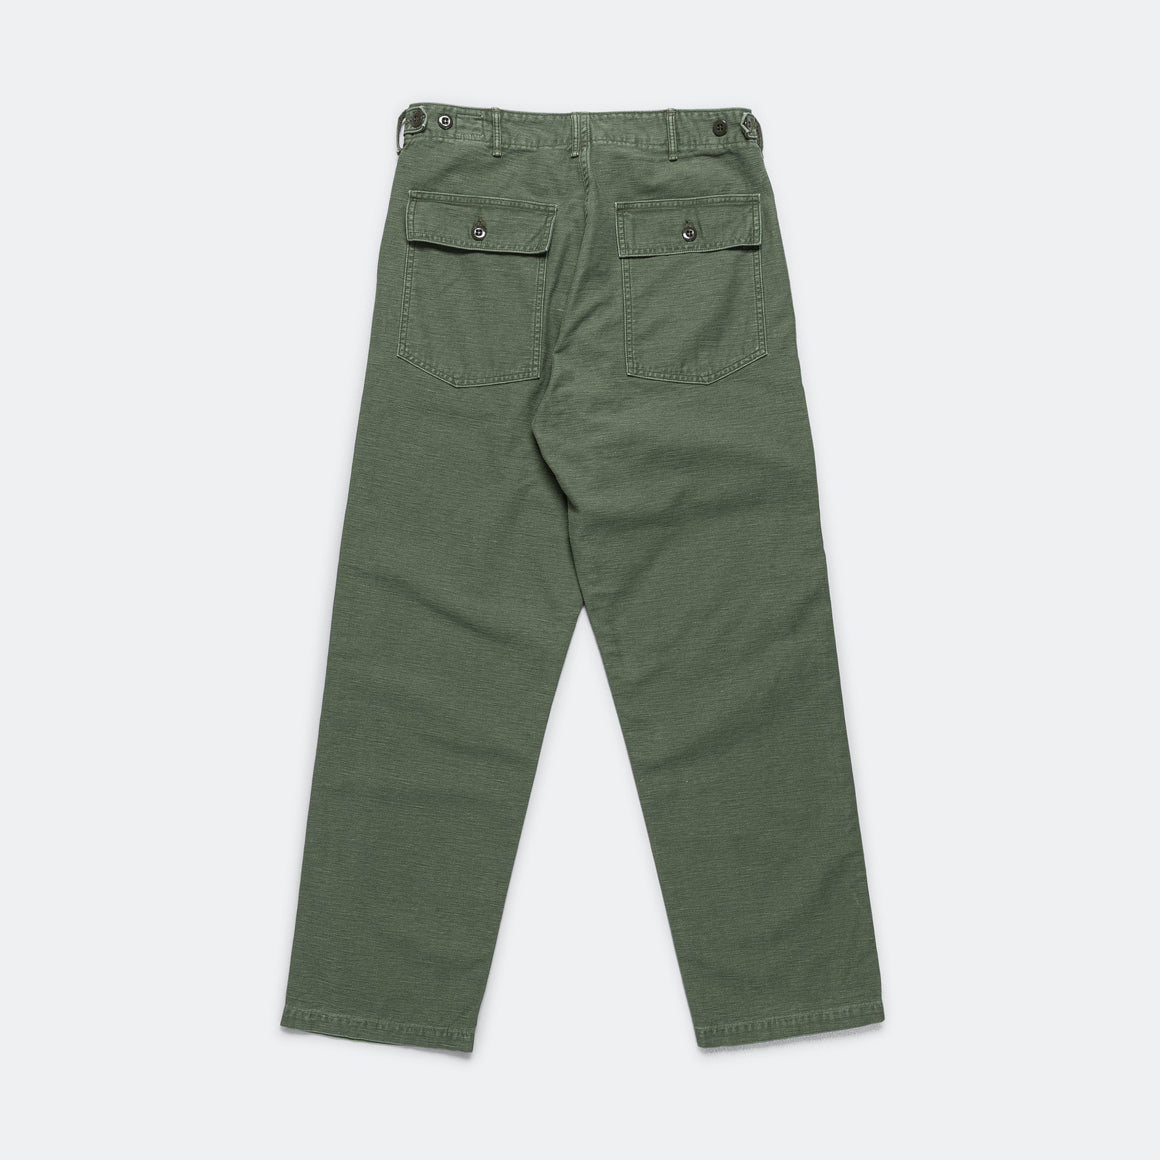 orSlow - US Army Fatigue Pants (Regular Fit) - Green Used - UP THERE